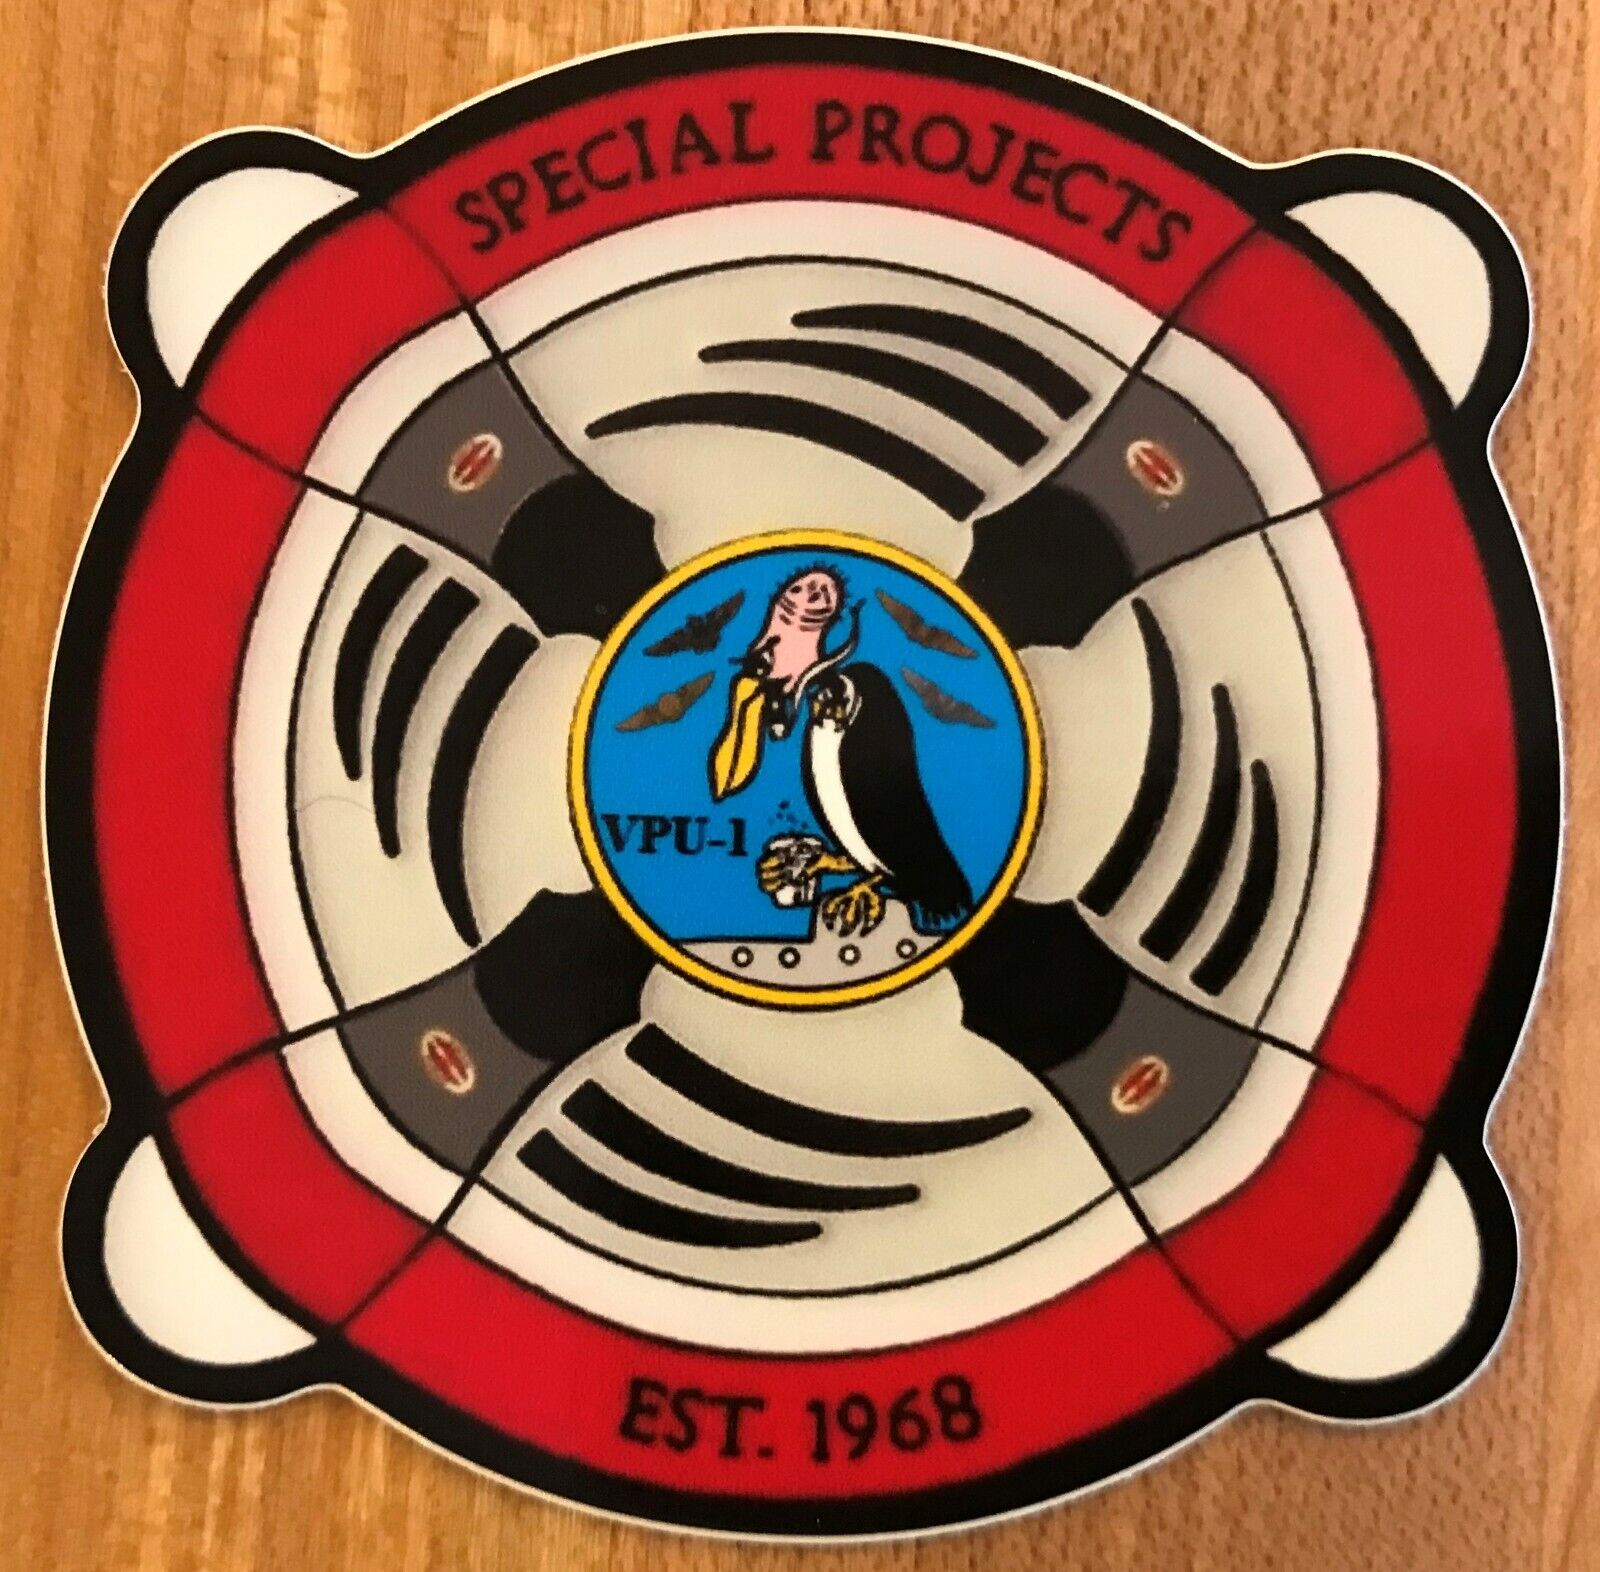 VPU-1 OLD BUZZARDS NAVY P-3C ORION SPECIAL PROJECTS PATROL SQUADRON STICKER